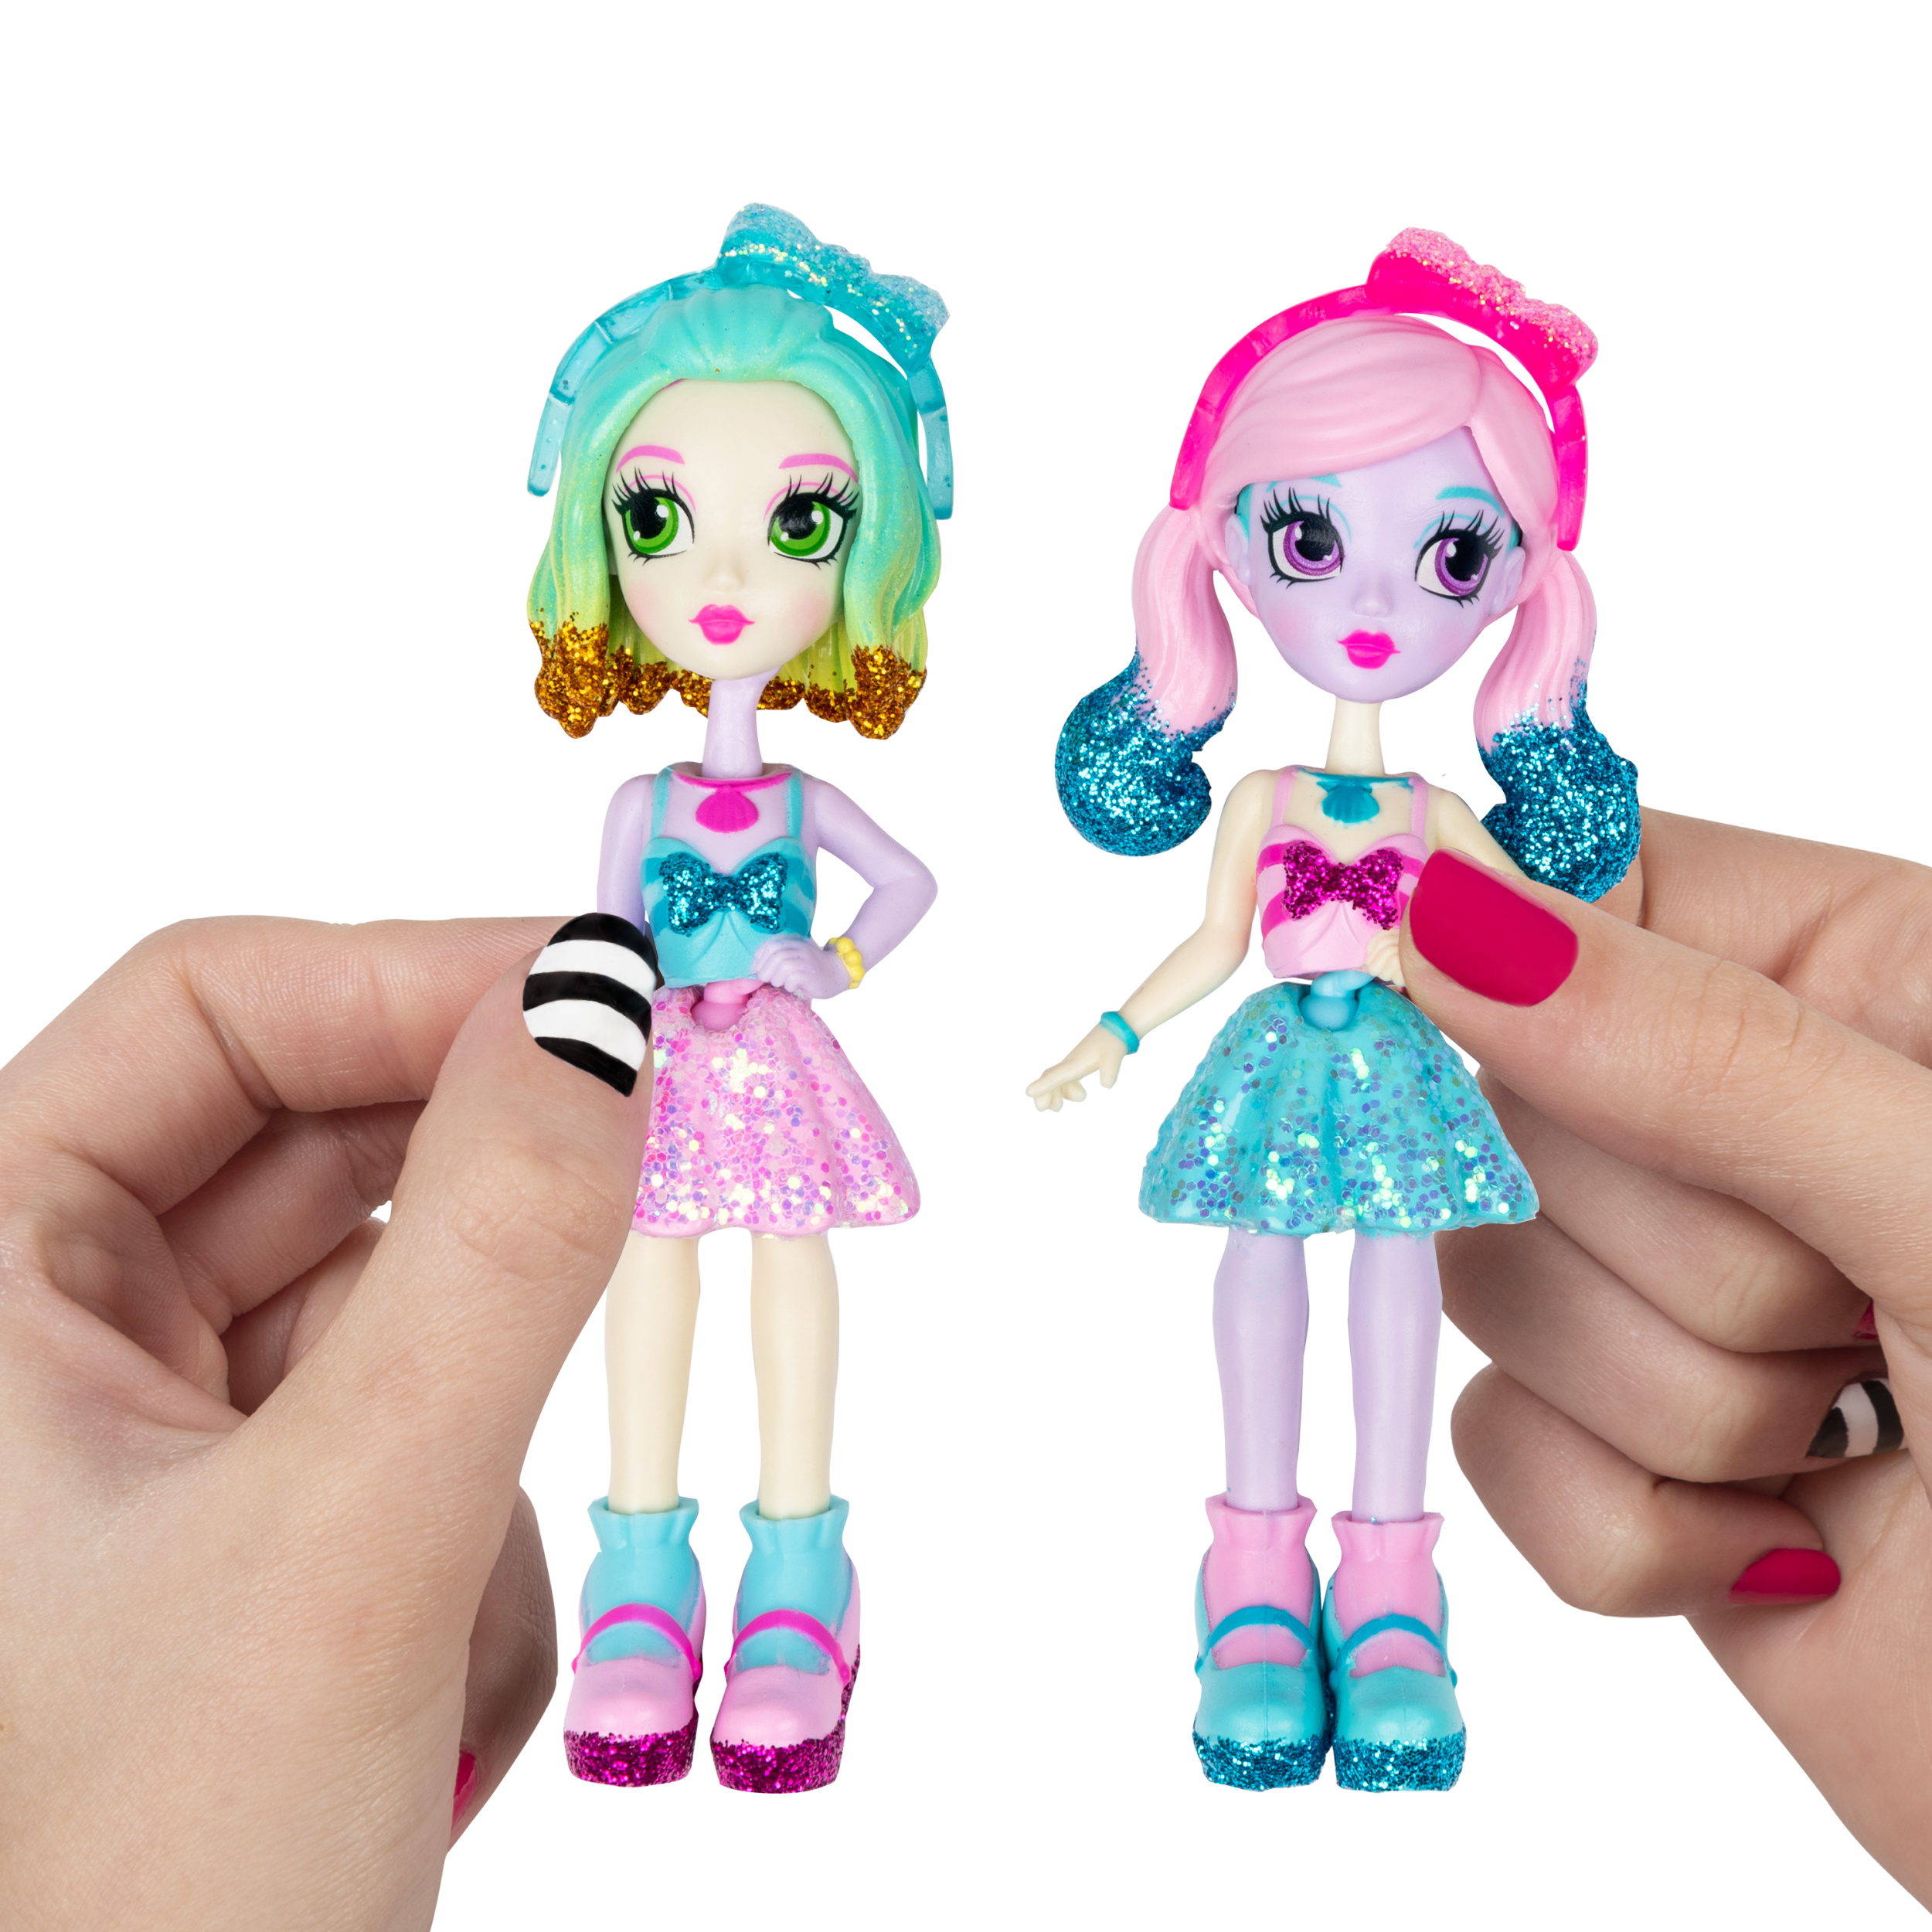 Off The Hook Style BFFs, Naia & Jenni (Spring Dance), 4-inch Small Dolls , for Girls Aged 5 and up - image 7 of 8